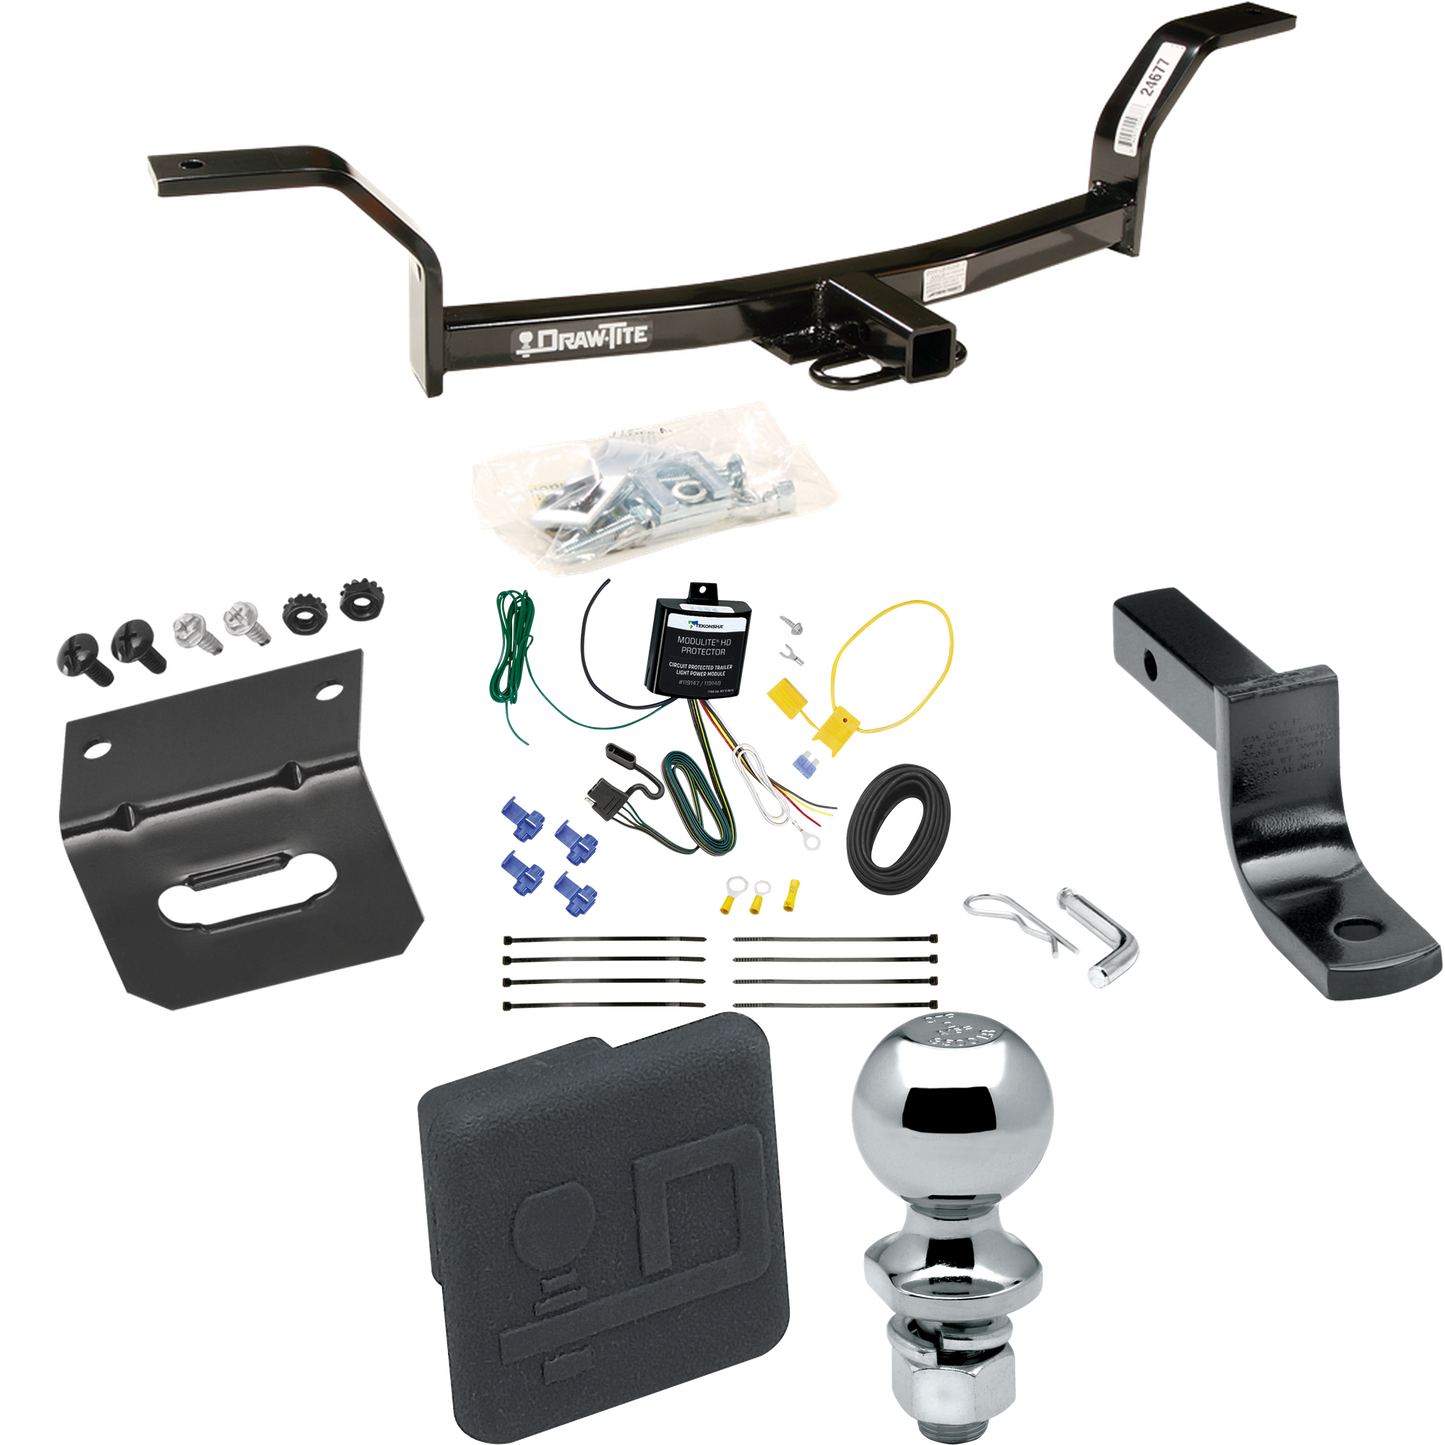 Fits 1992-2000 Honda Civic Trailer Hitch Tow PKG w/ 4-Flat Wiring Harness + Draw-Bar + 2" Ball + Wiring Bracket + Hitch Cover By Draw-Tite